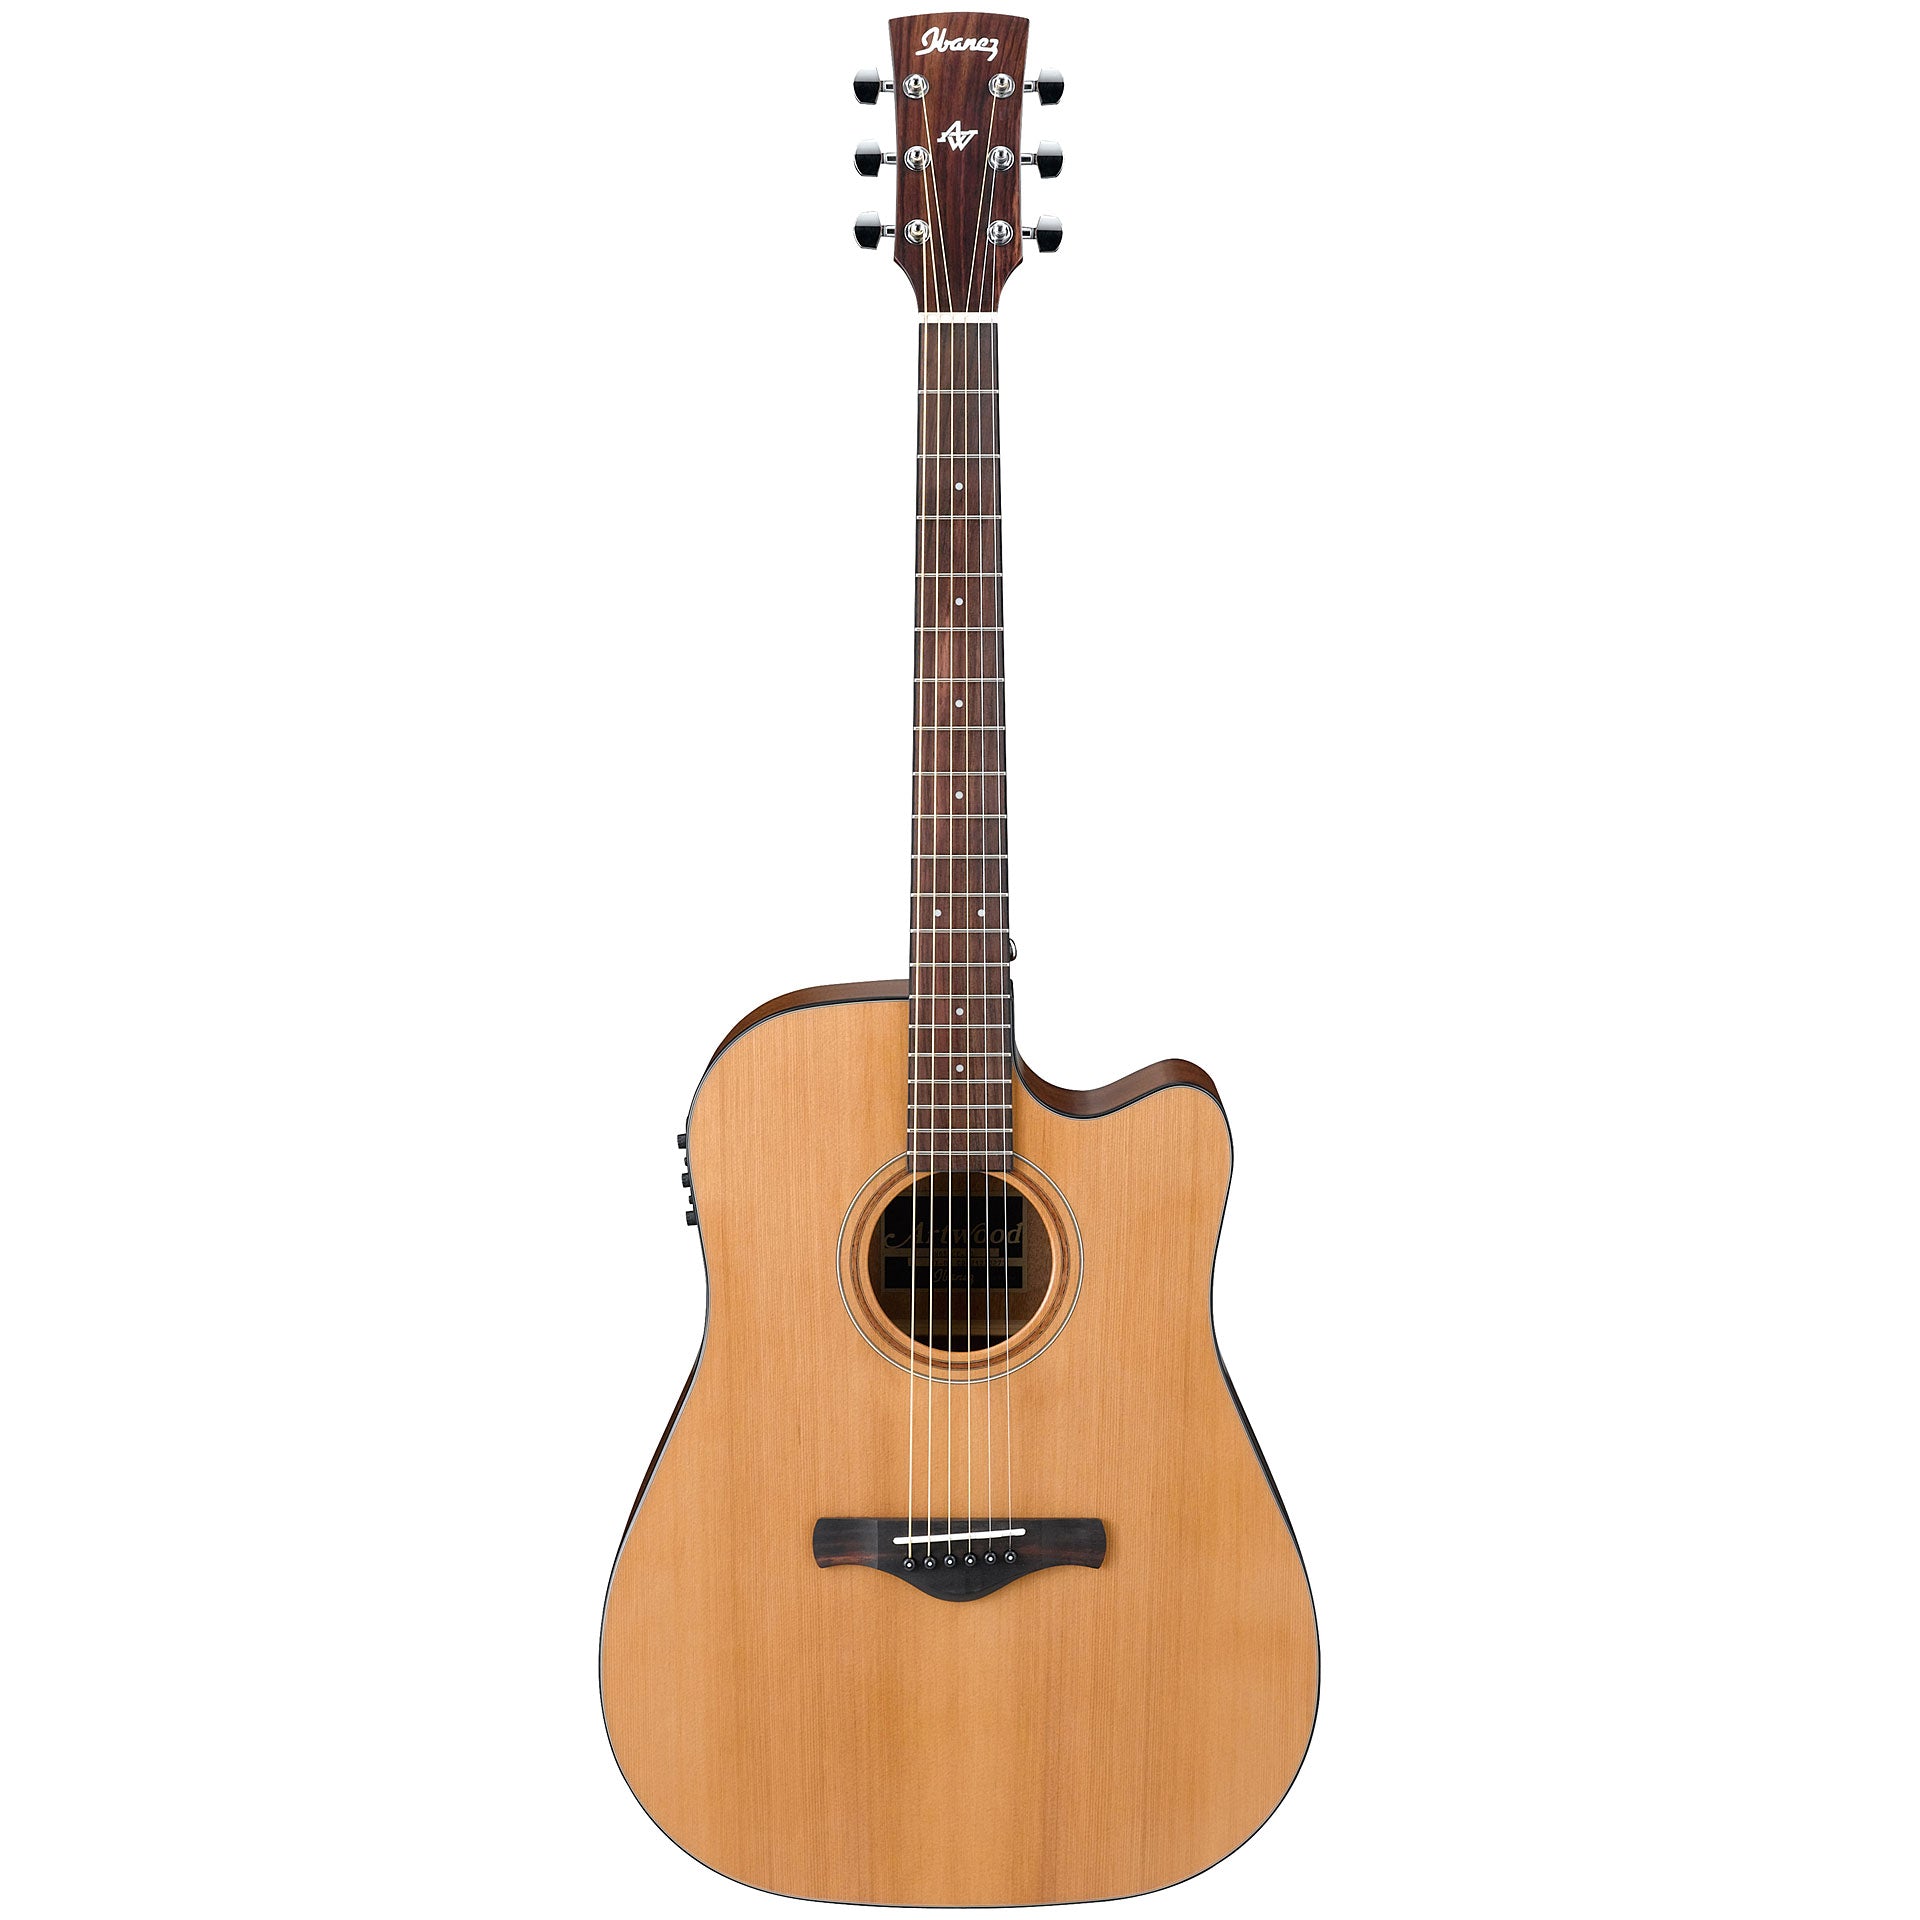 Ibanez AW65ECELG Electro-acoustic Guitar